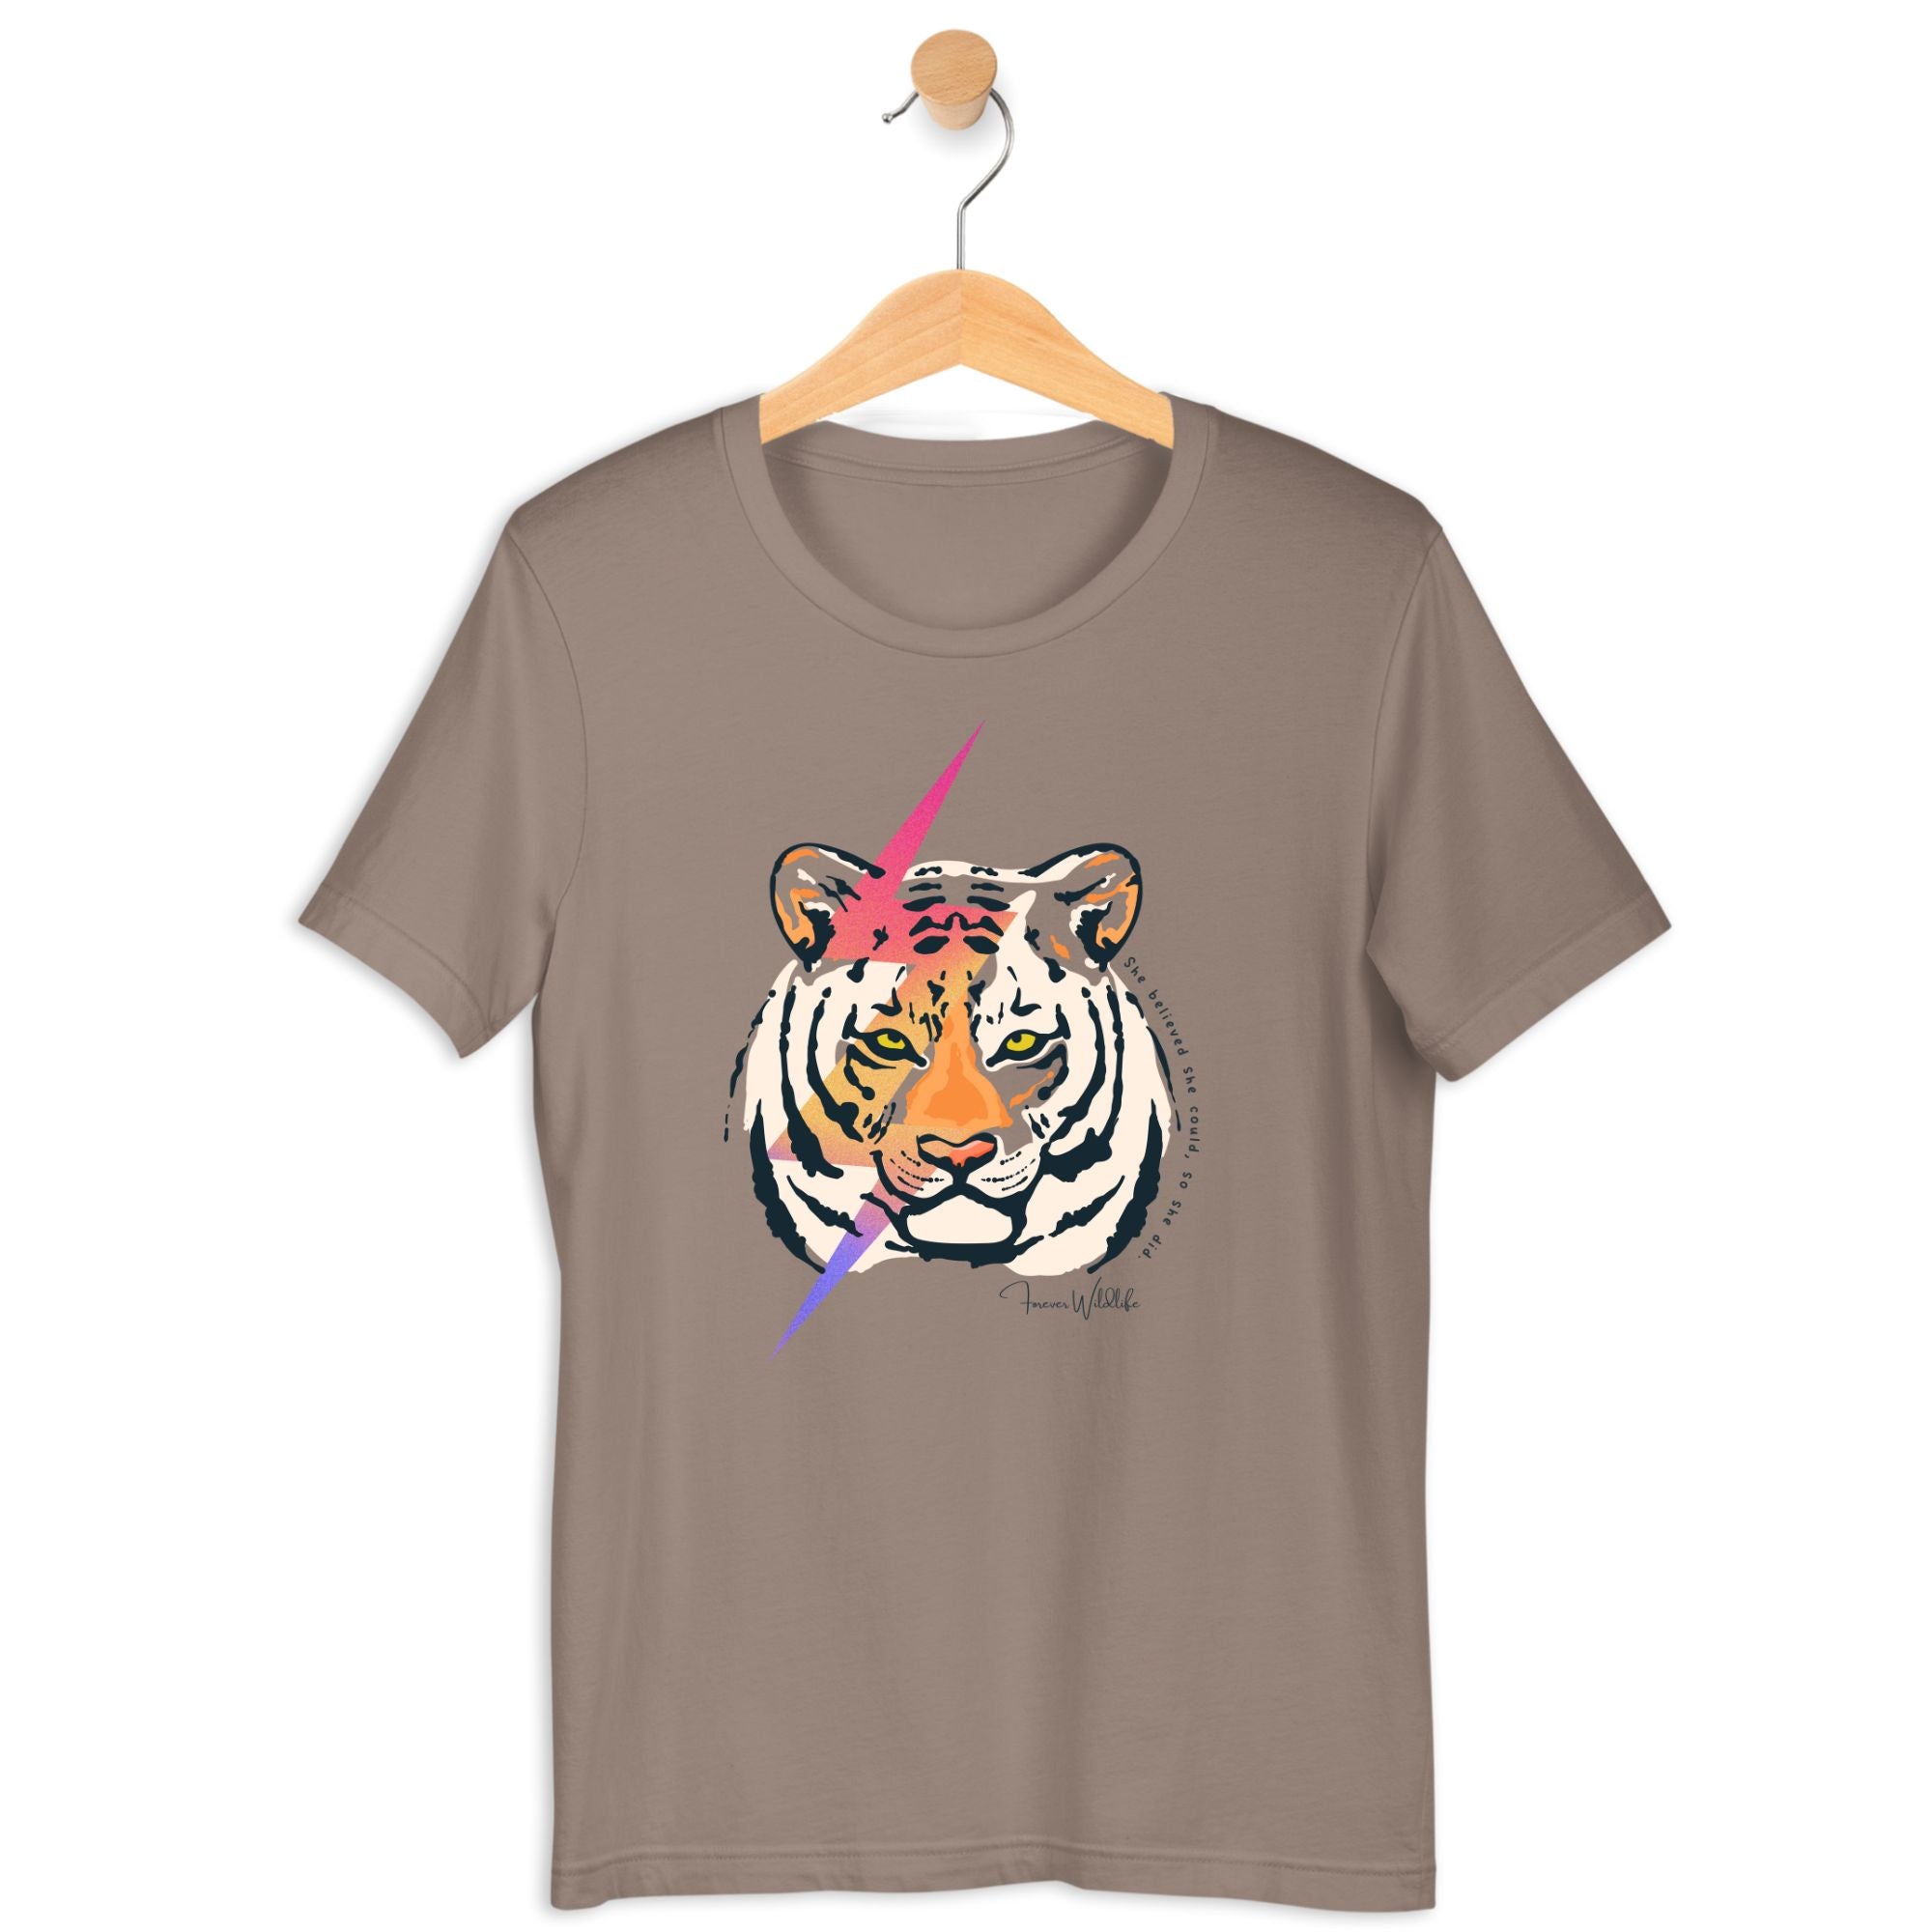 Tiger T-Shirt in Pebble – Premium Wildlife T-Shirt Design with She Believed She Could So She Did Text, Tiger Shirts & Wildlife Clothing